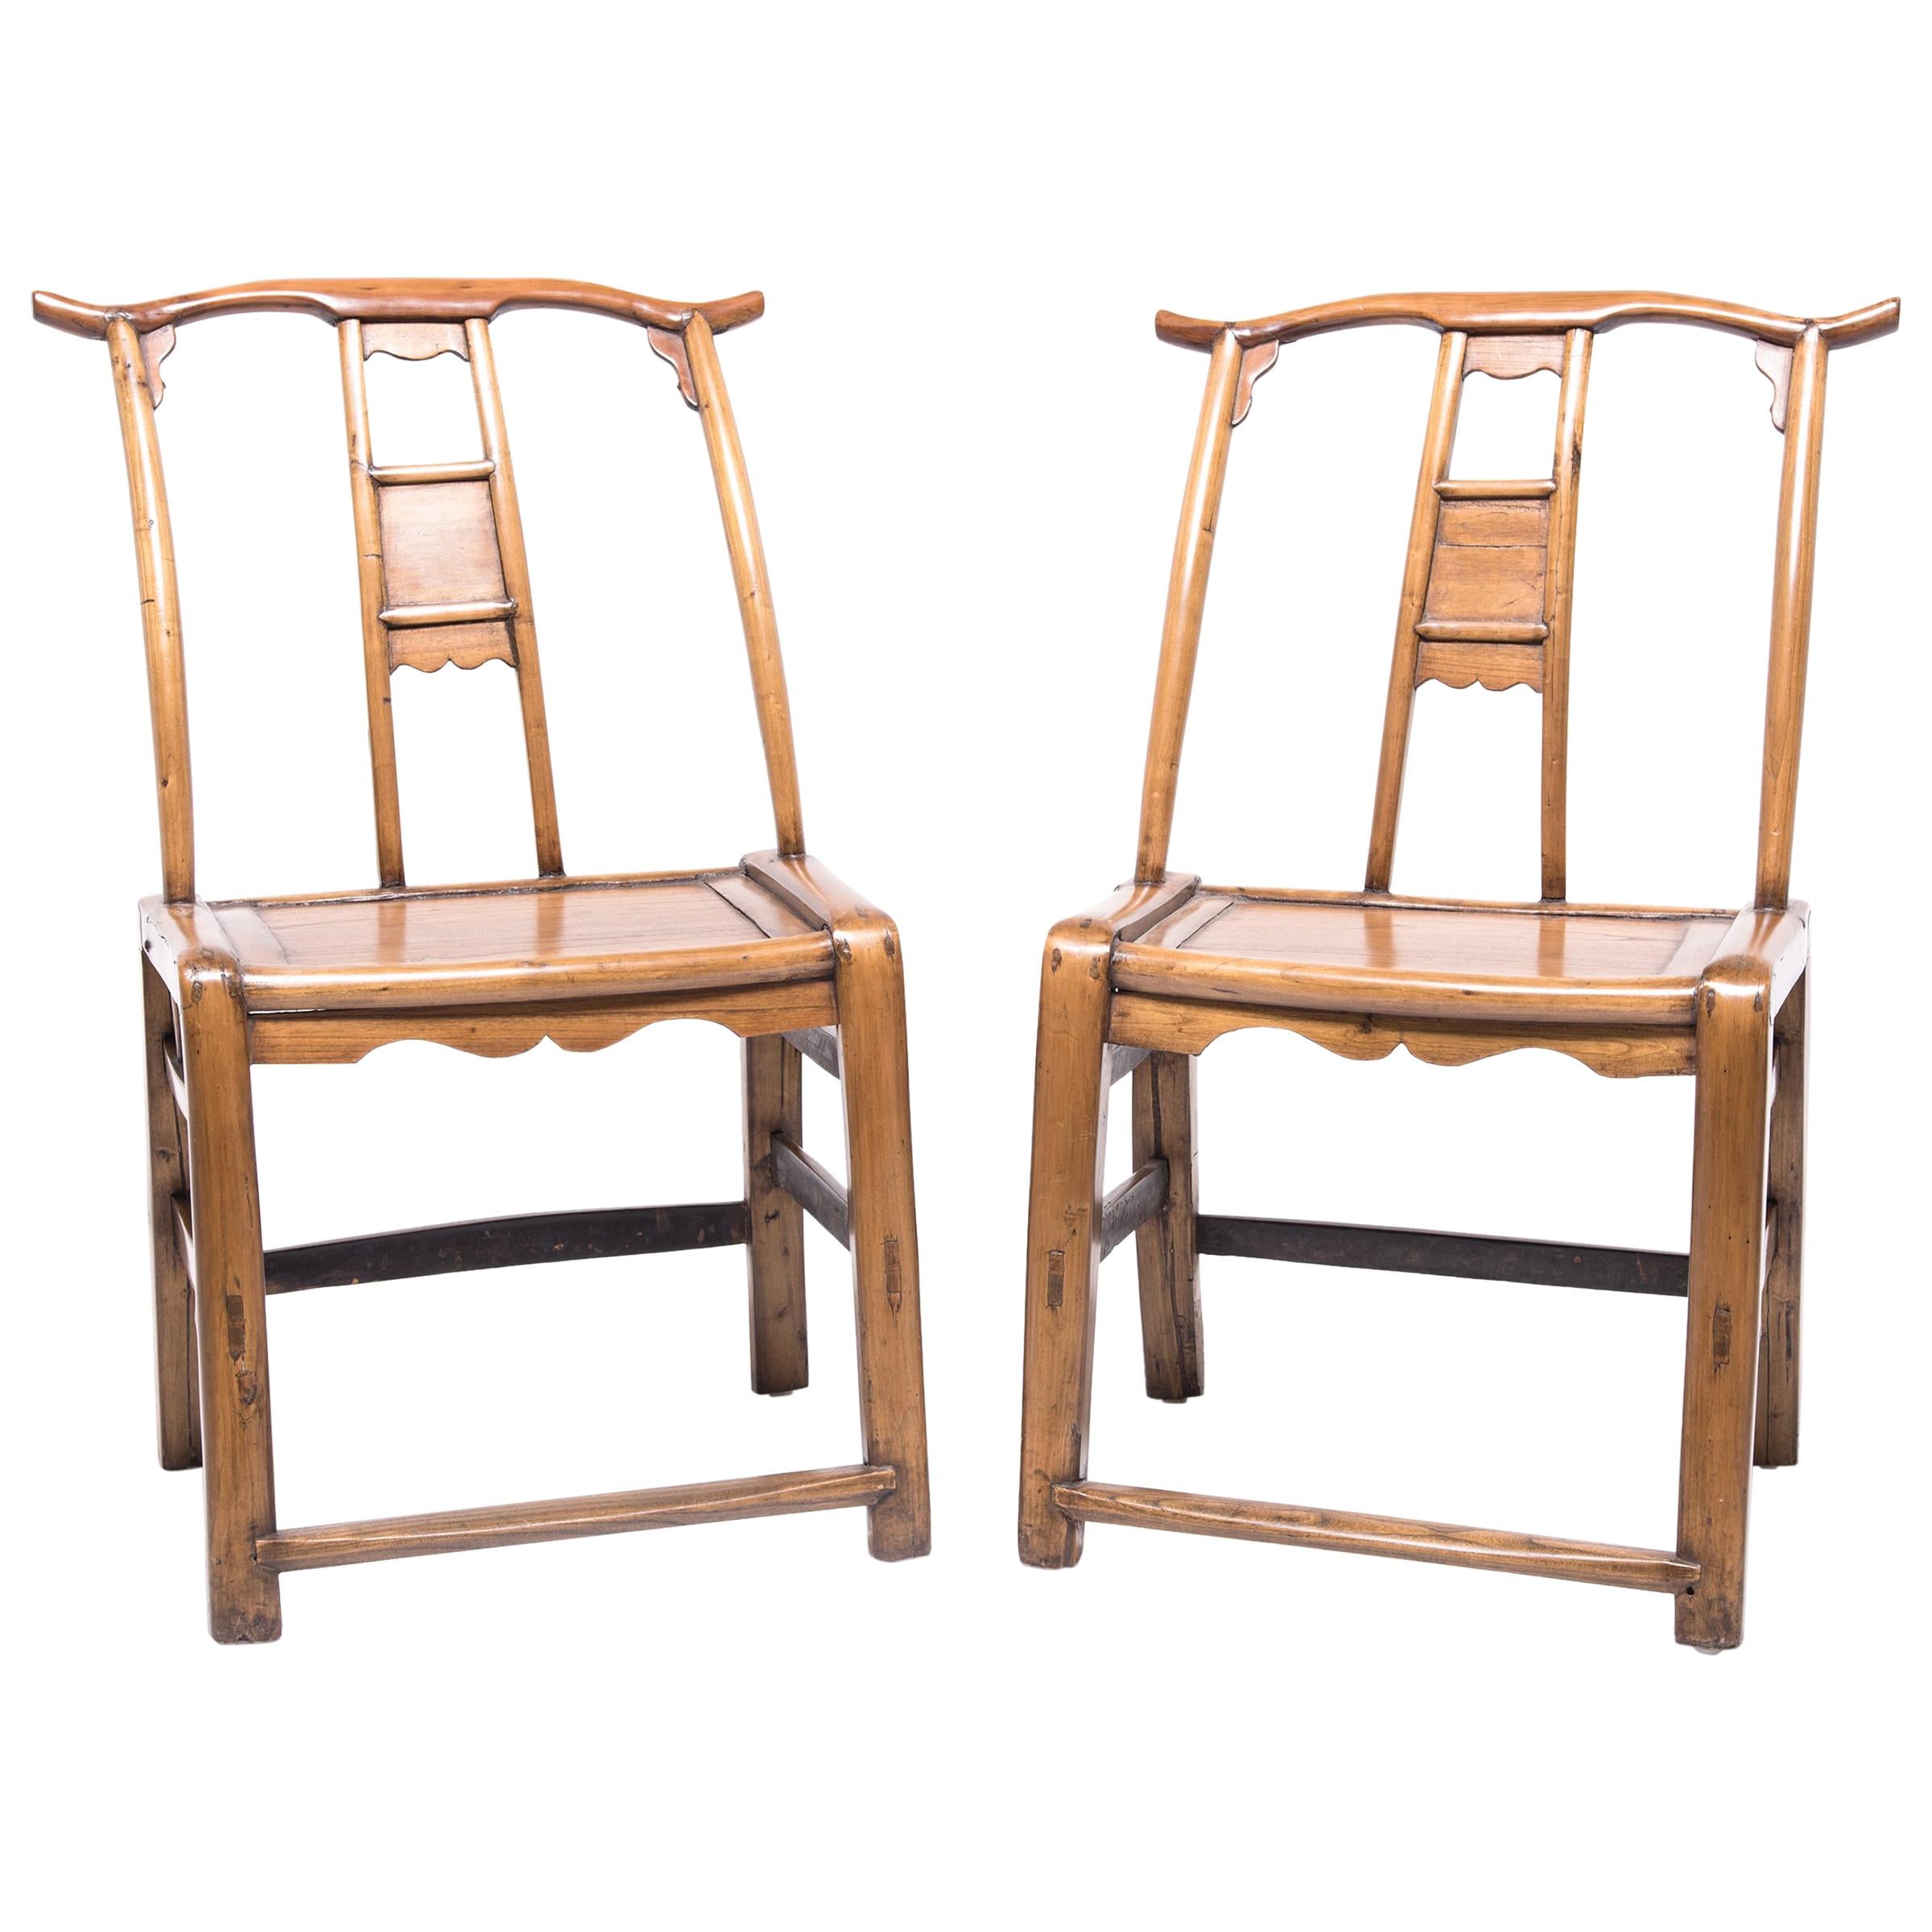 Pair of Chinese Provincial Bentform Chairs, c. 1850